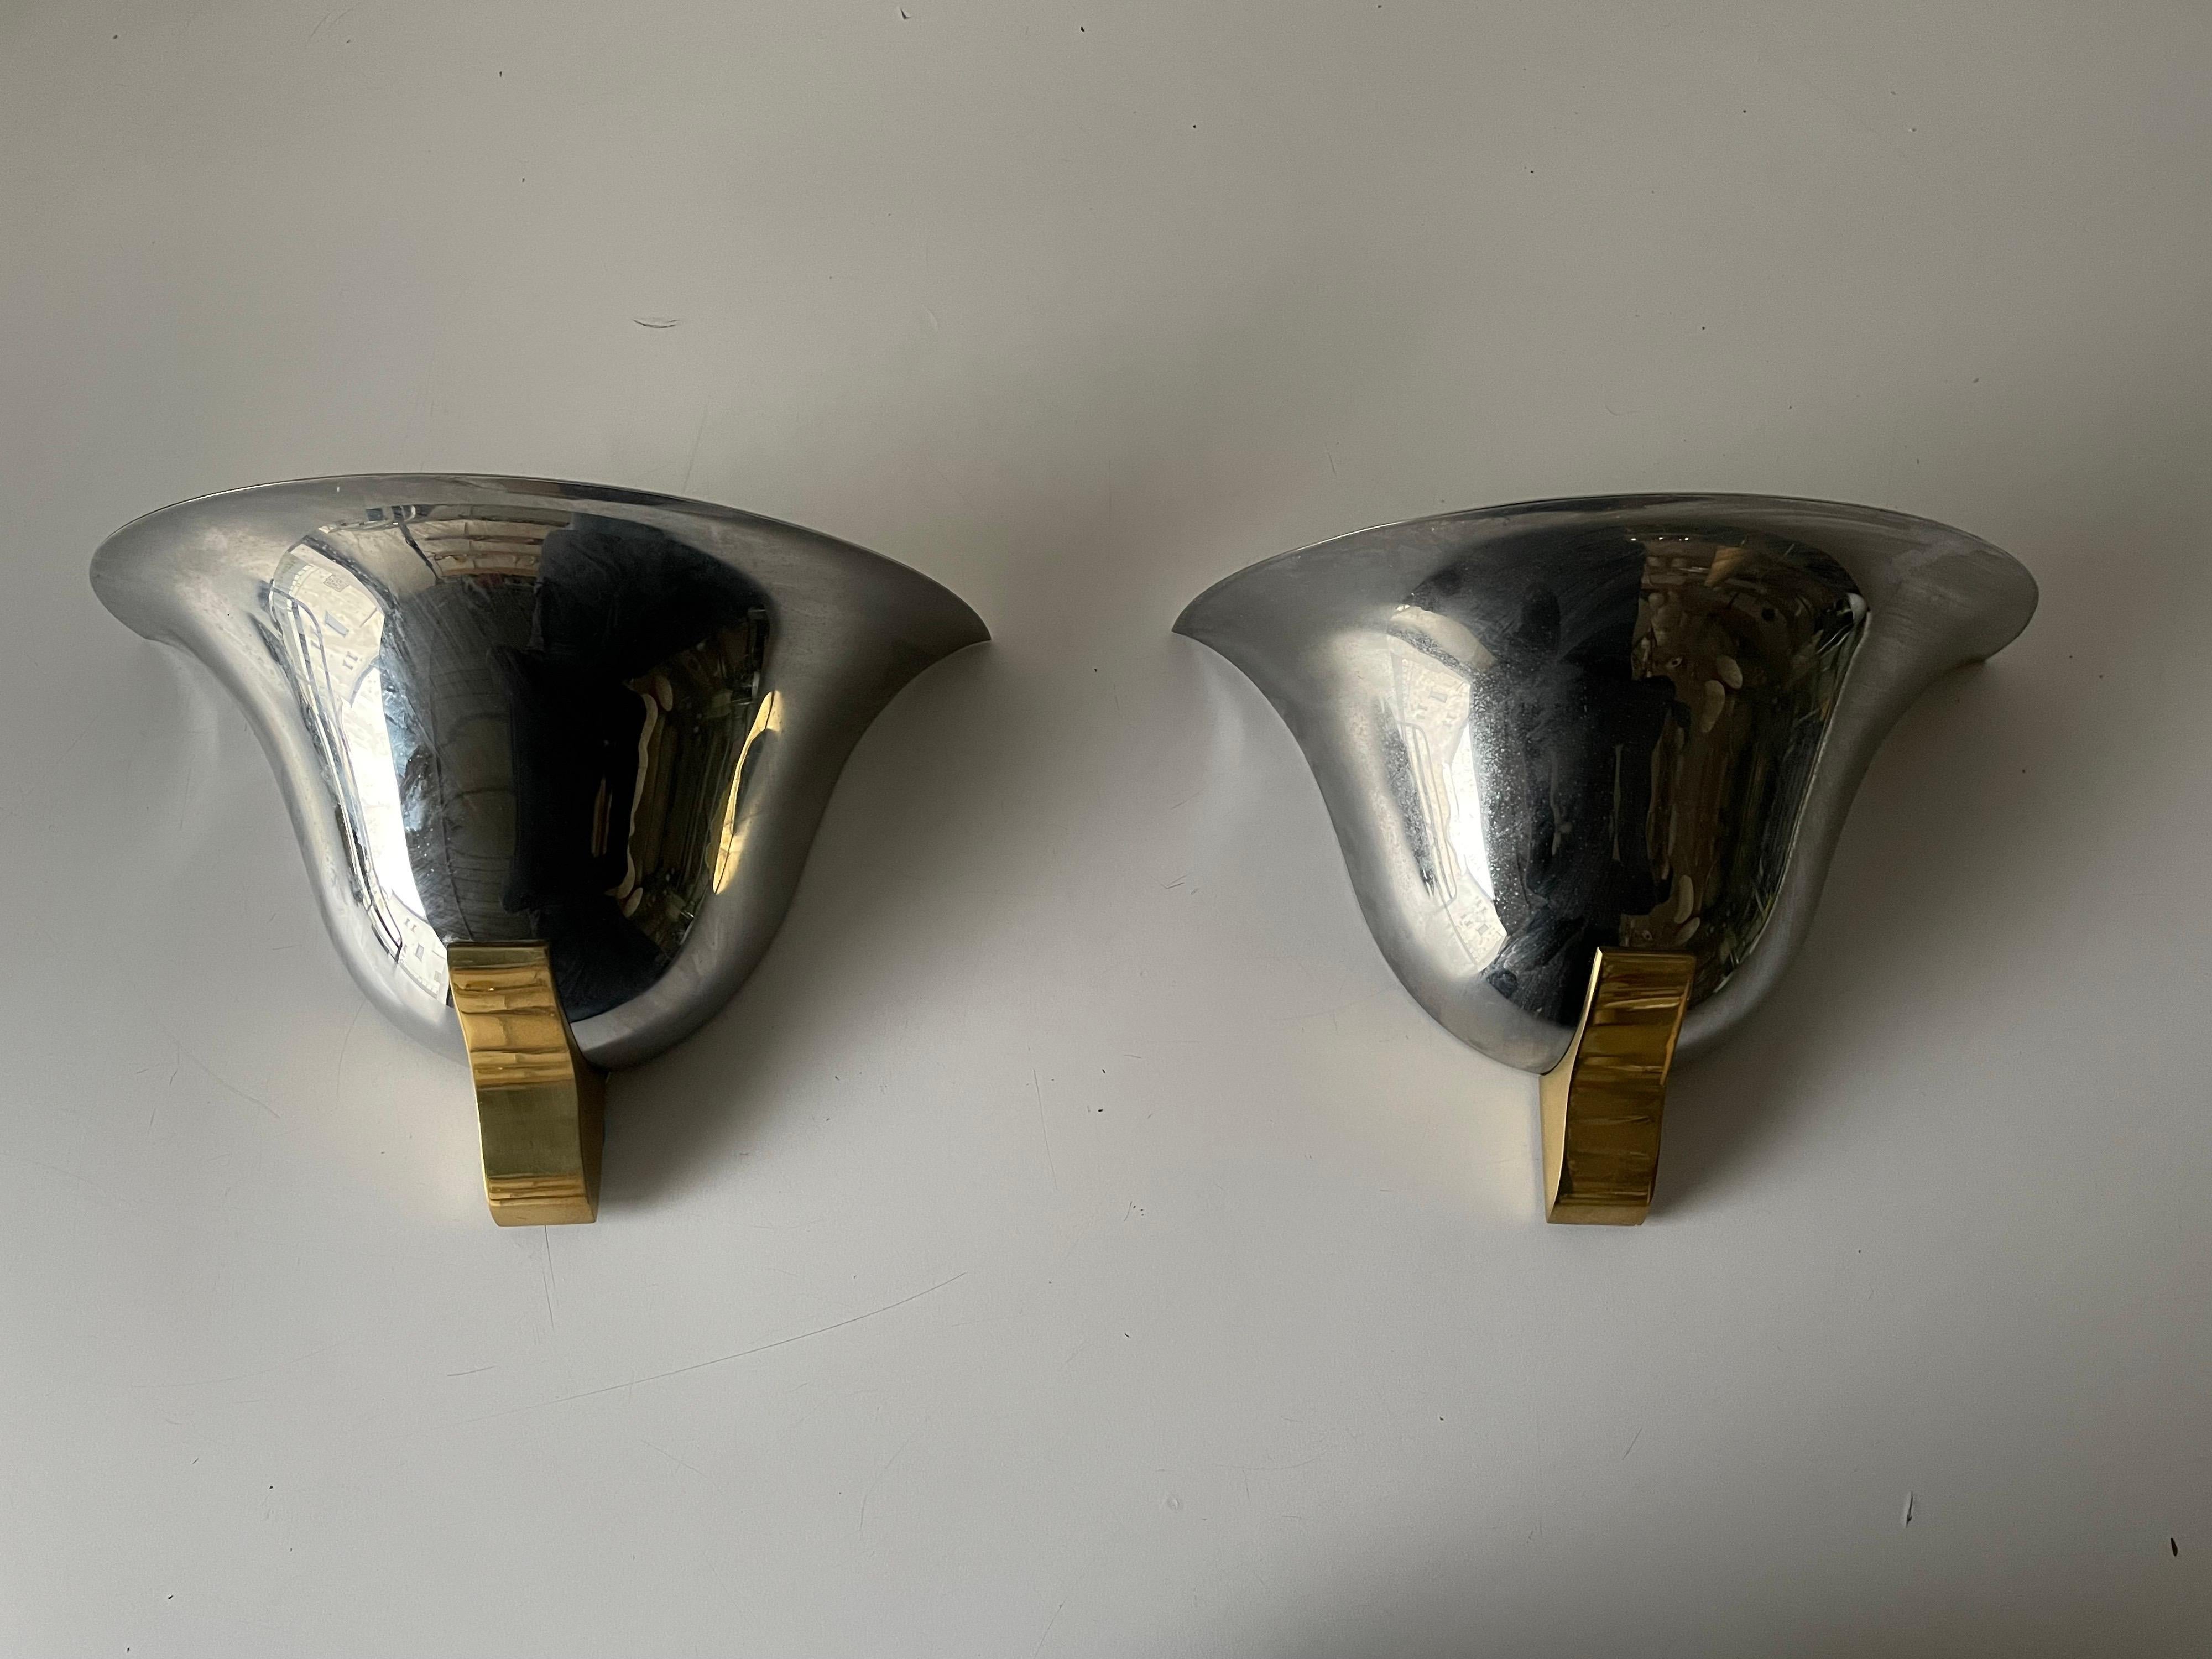 Chrome & gold metal pair of sconces by Art-Line, 1980s Germany

Very elegant and Minimalist sconces

Lamps are in very good condition.

These lamps works with E27 standard light bulbs. 
Wired and suitable to use in all countries. (110-220